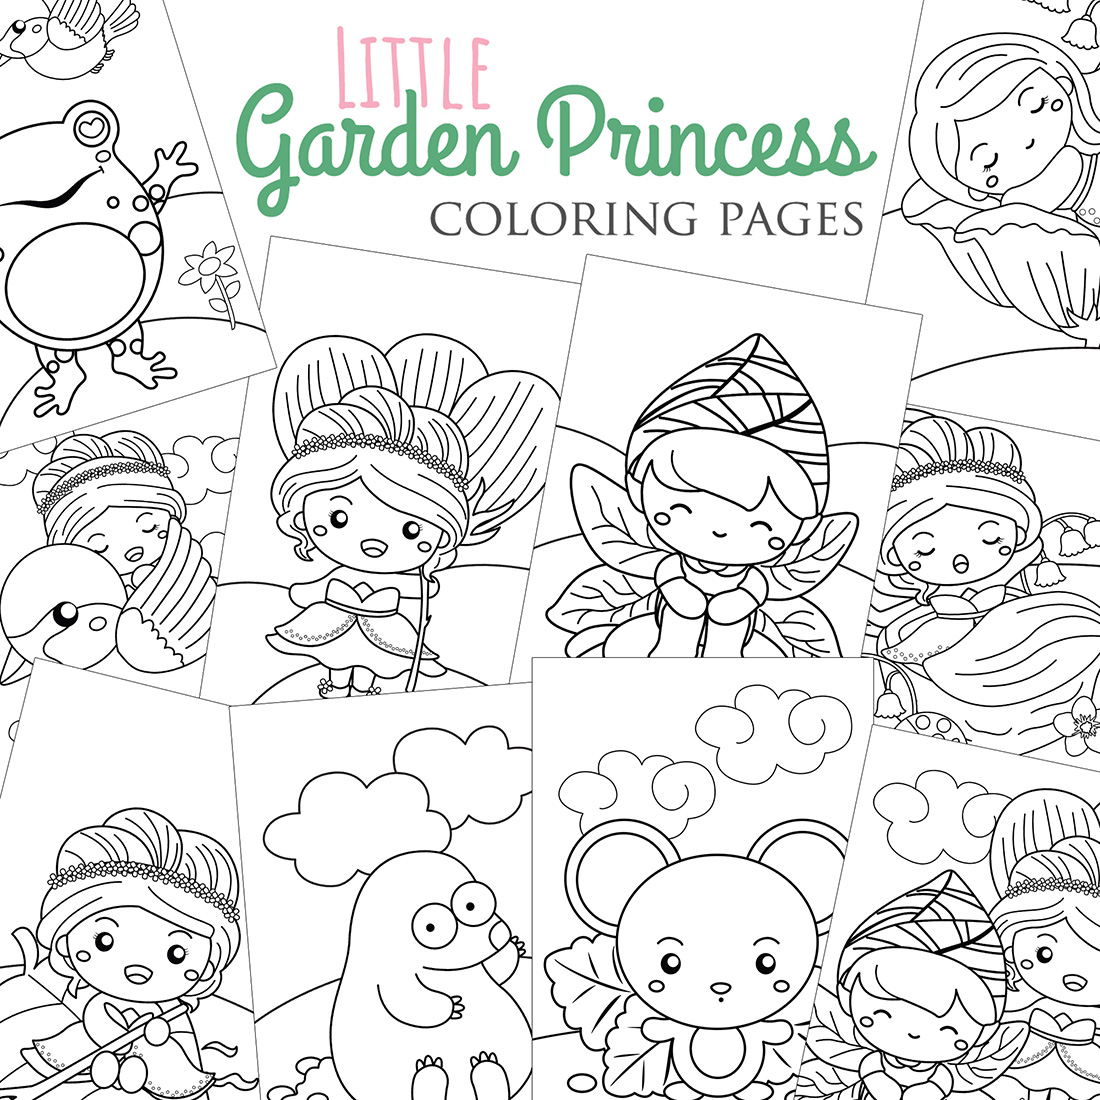 Little Garden Princess Girl Kids and Animal Cartoon Coloring Activity School for Kids and Adult cover image.